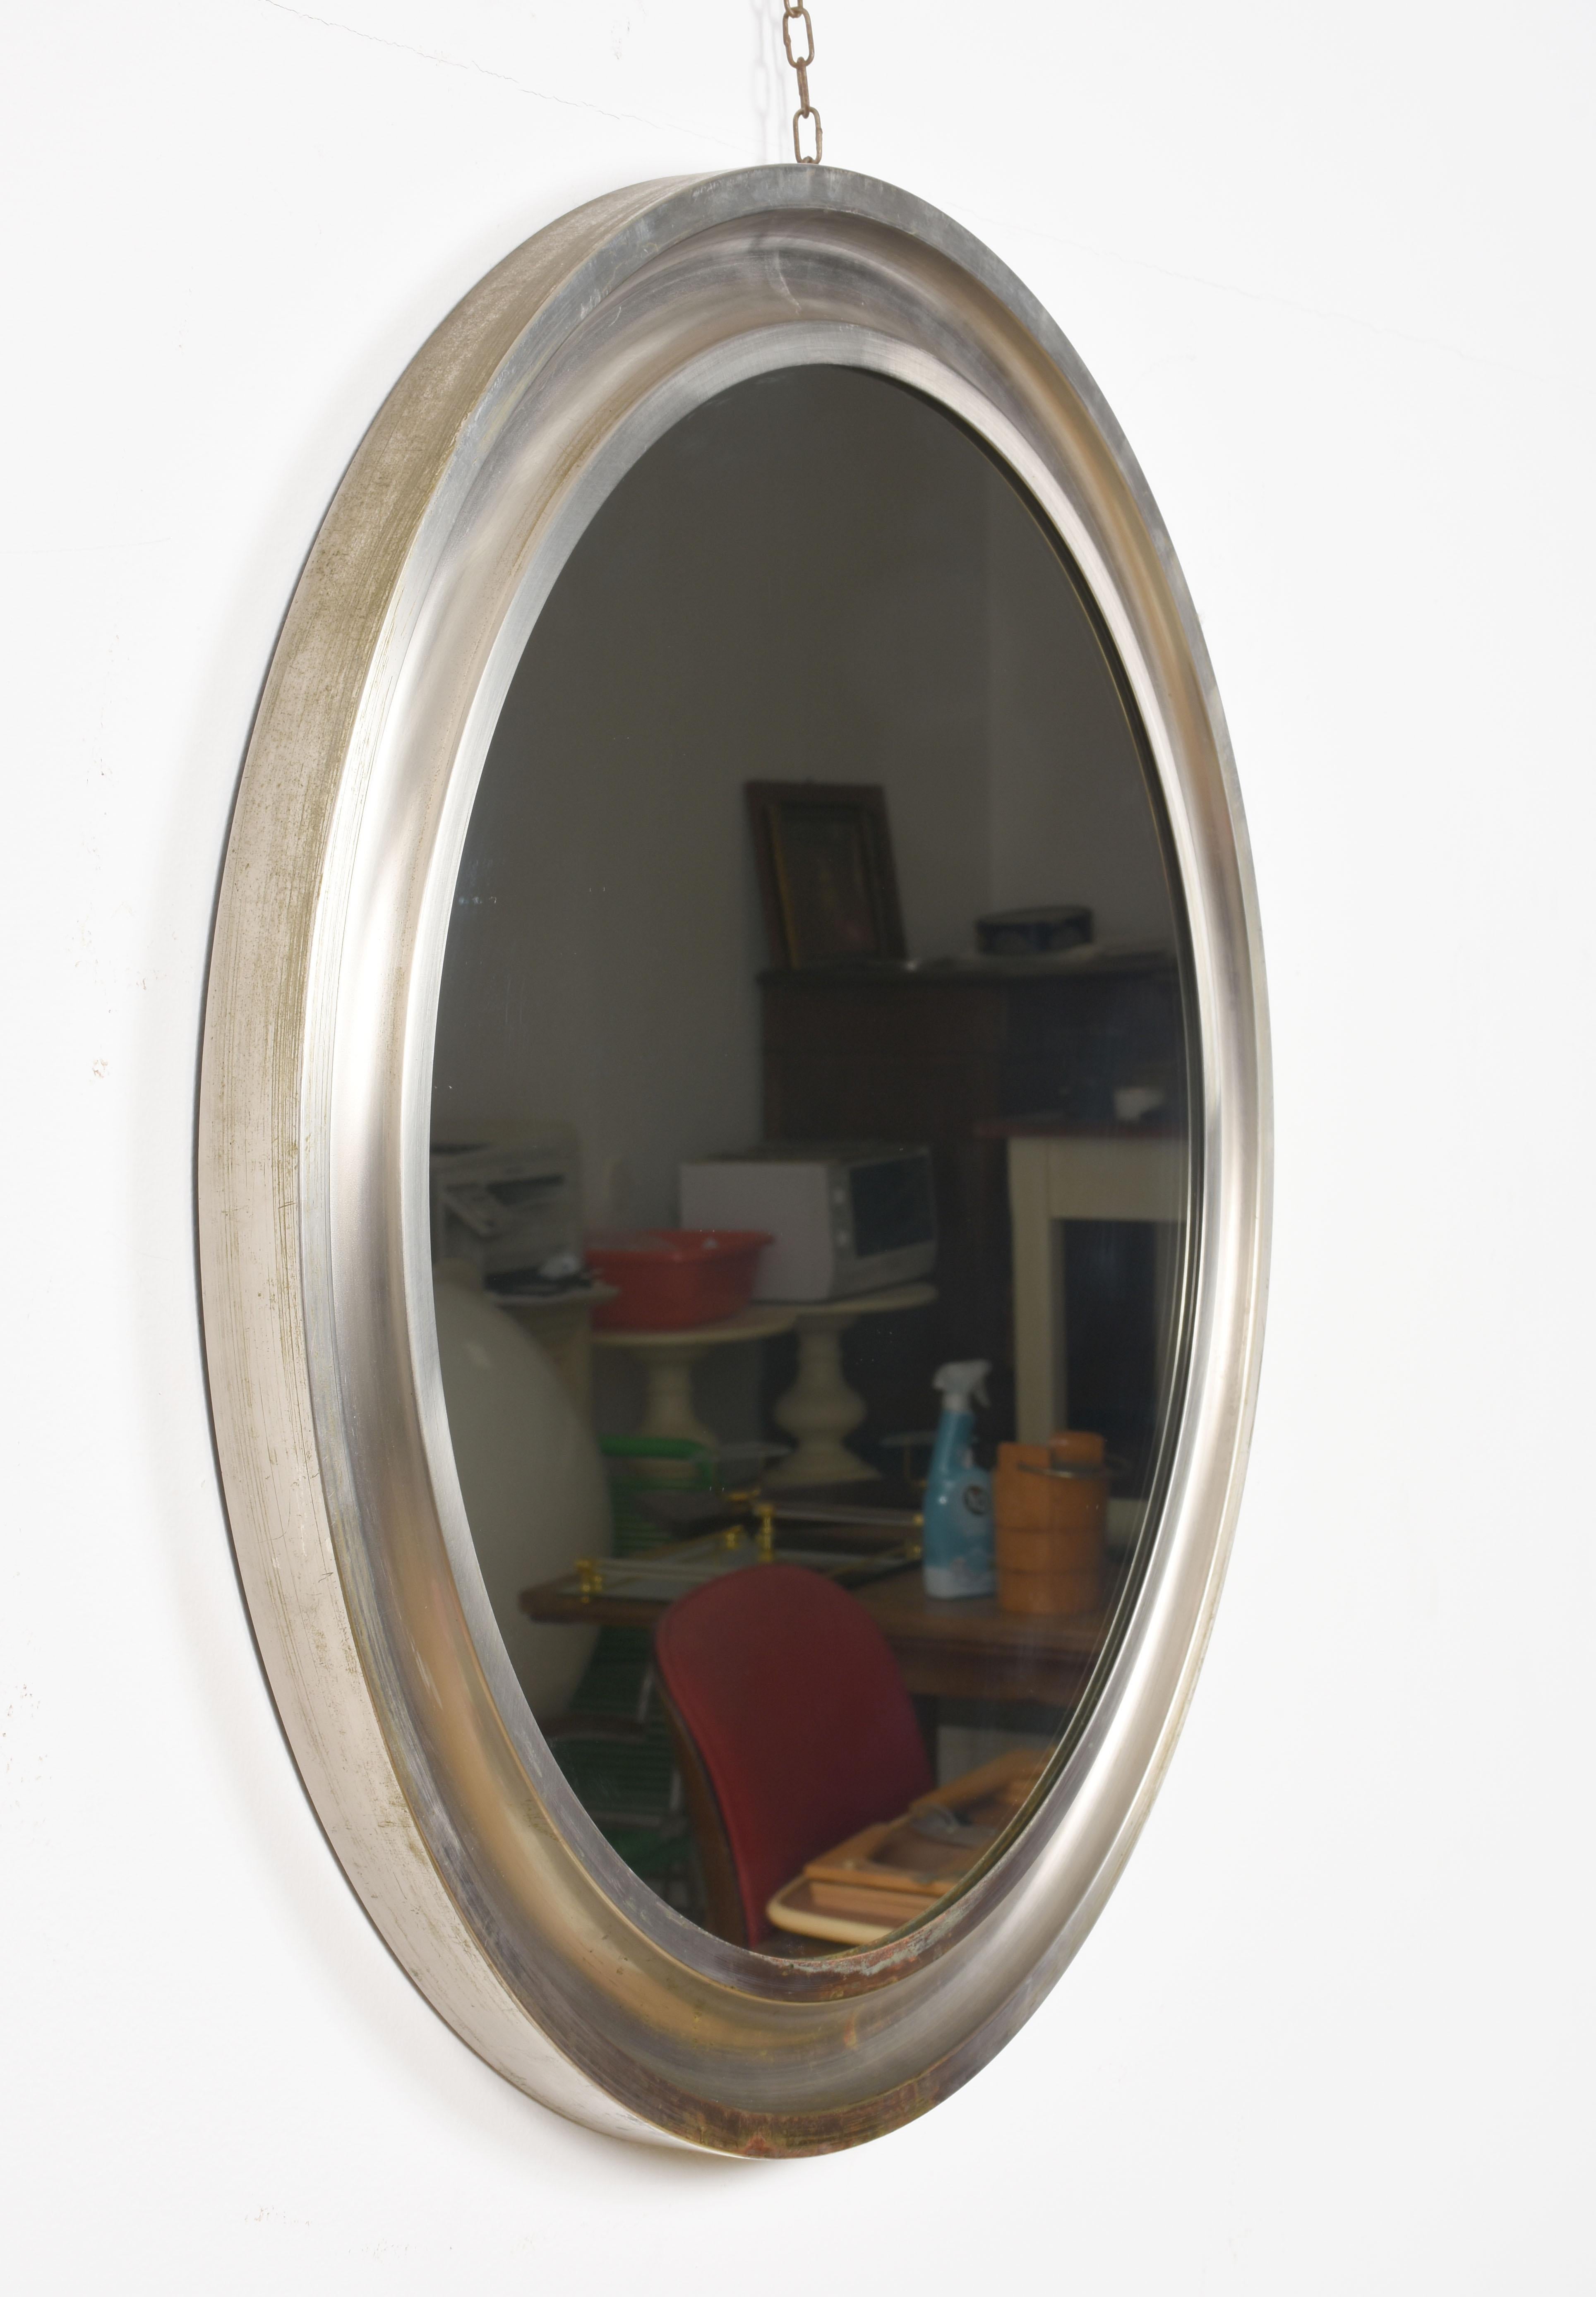 Sergio Mazza midcentury wall mirror in aluminum and metal for Artemide, produced in Italy during 1960s.

This astonishing piece has a wonderful aluminum and metal round frame. The condition is excellent as the original patina gave value and